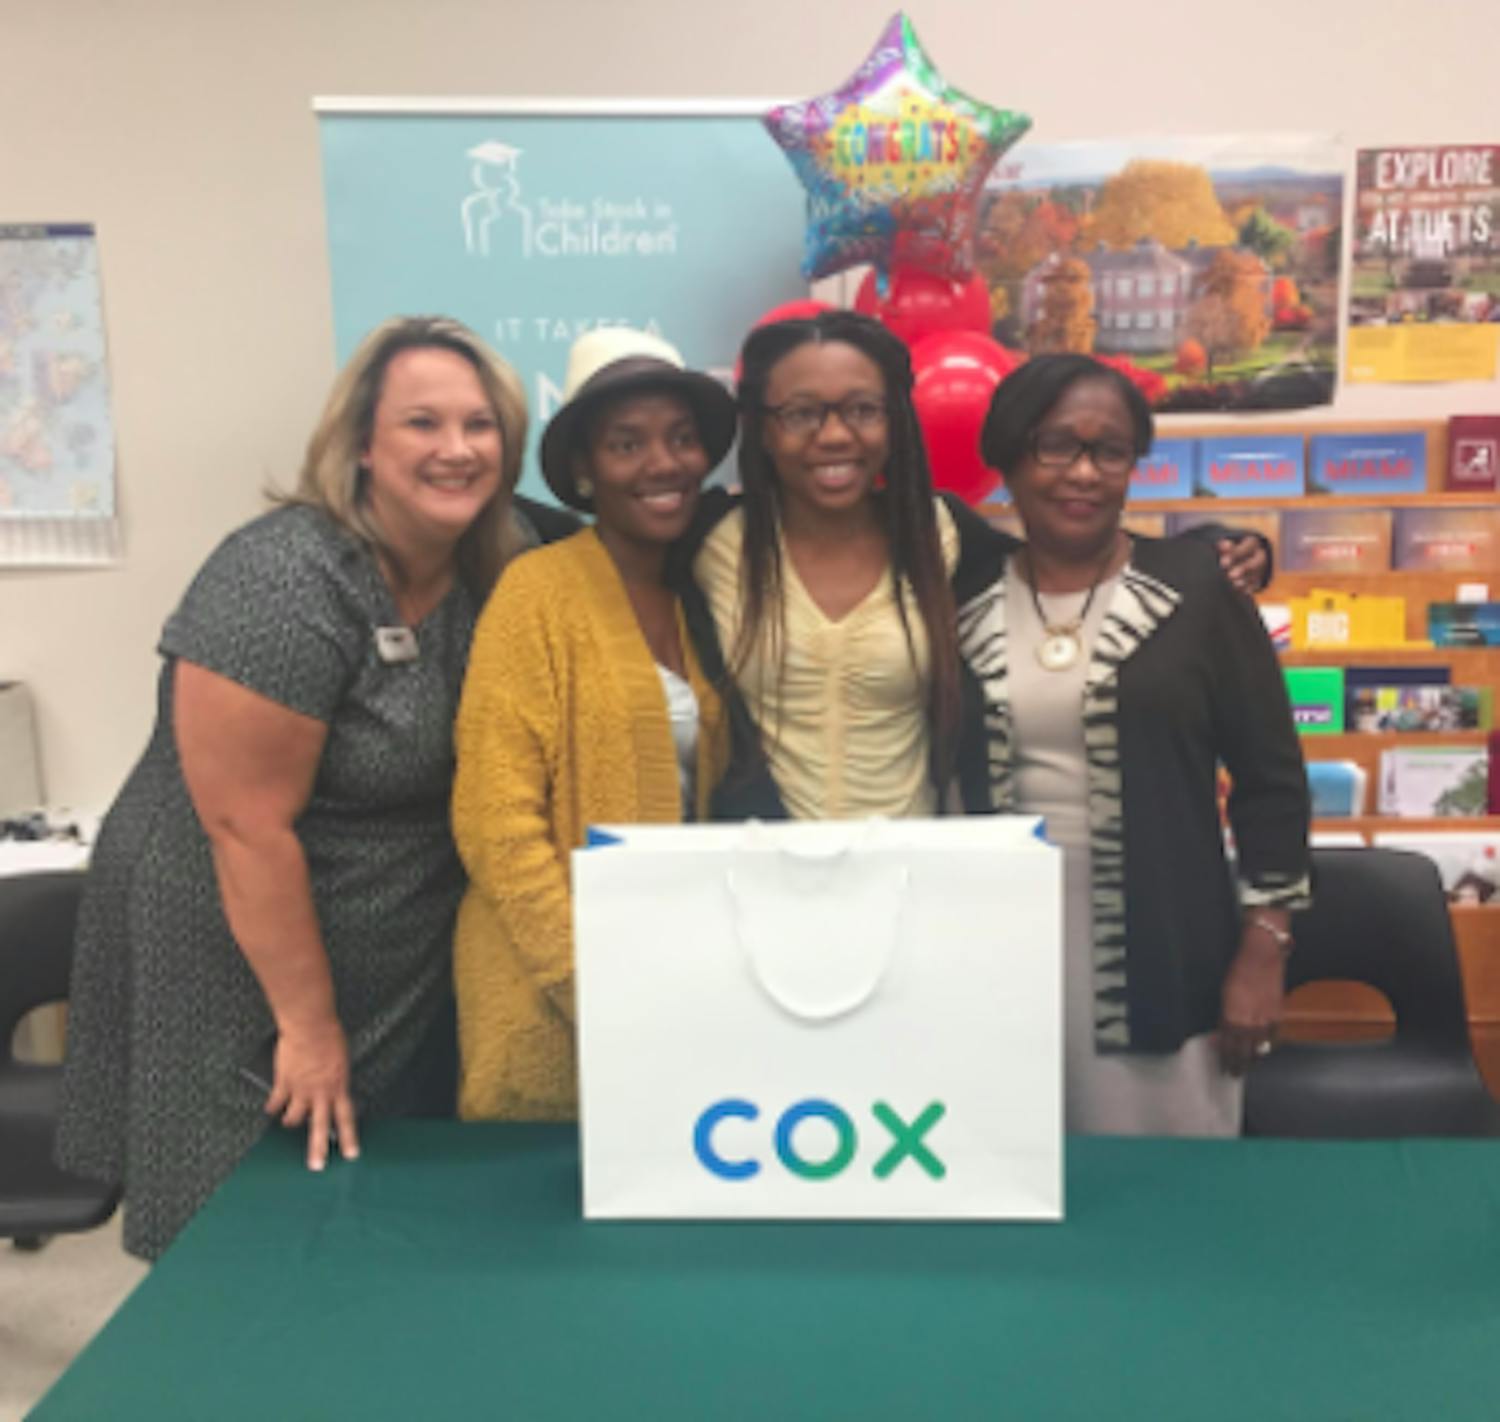 Former Superintendent Karen Clarke, left, Moore’s mom, Tedreyonce&#x27; Moore and Deputy Superintendent Donna Jones smile on Oct. 28, 2019, the day Moore received her laptop. Clarke and Jones were Moore’s mentors. (Courtesy of The Education Foundation of Alachua County)